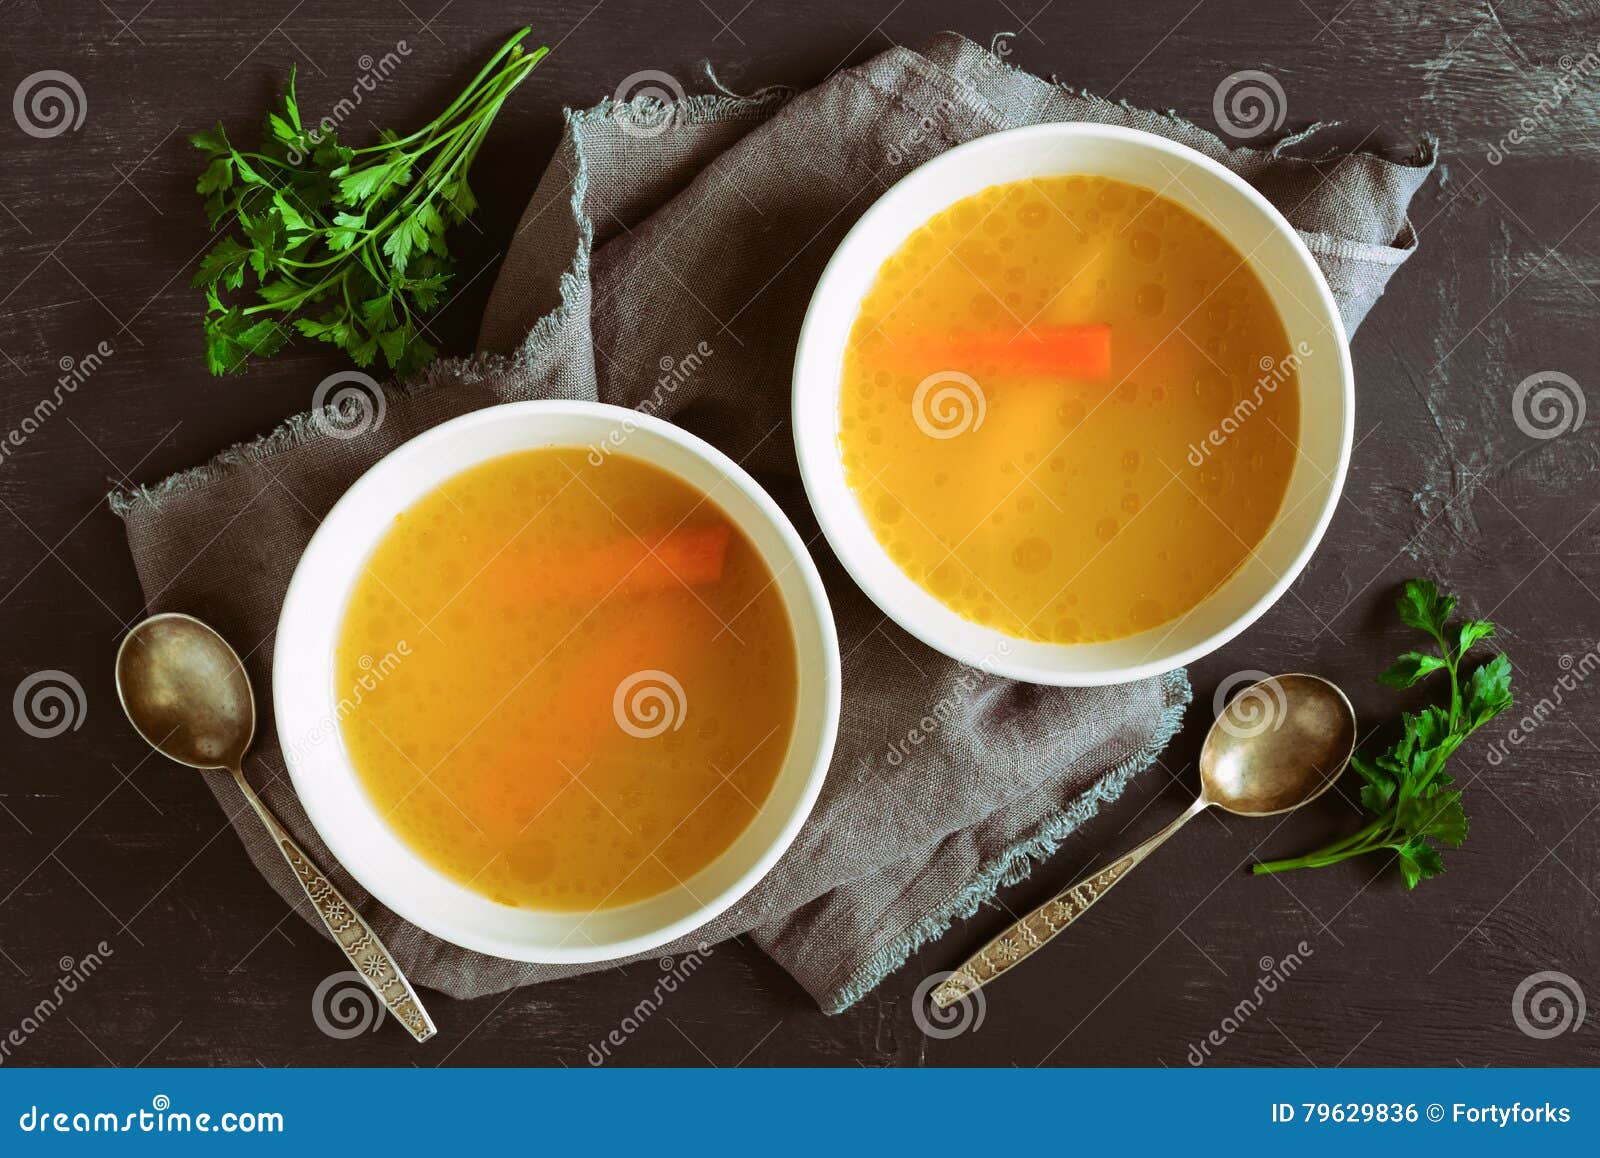 bouillon served in two bowls